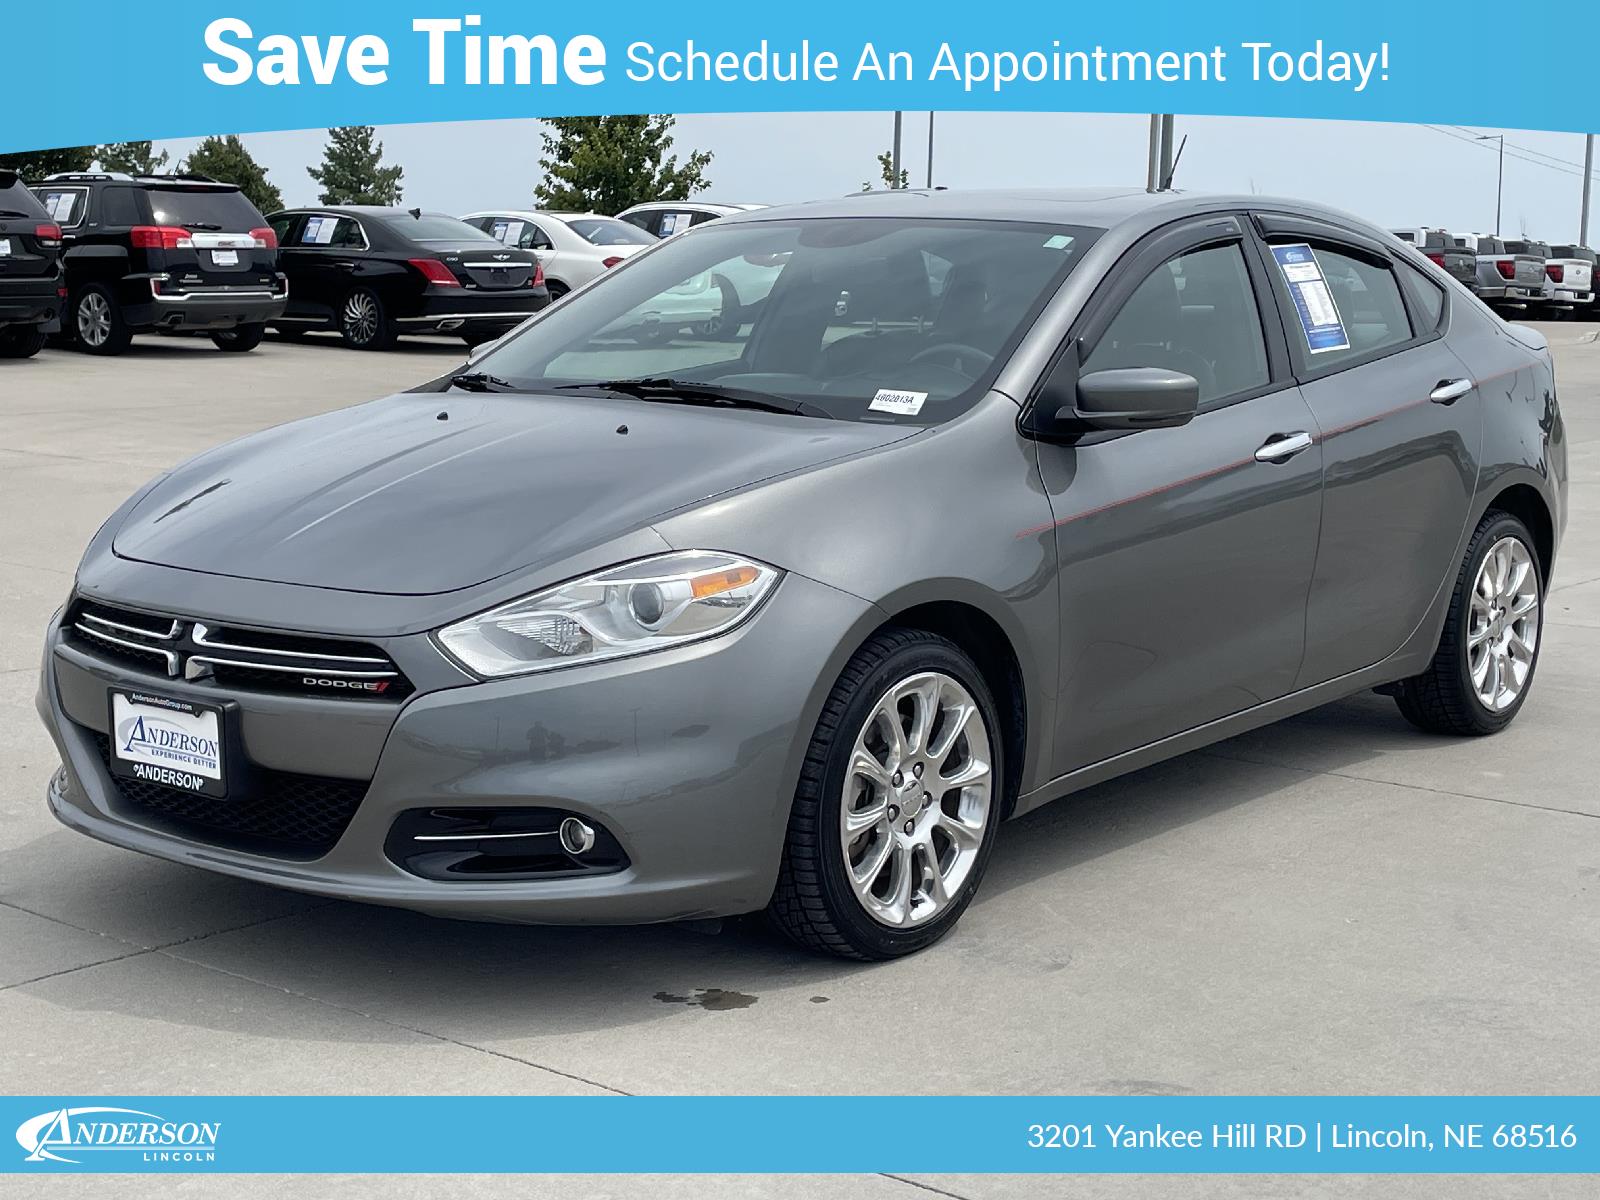 Used 2013 Dodge Dart Limited Stock: 4002013A